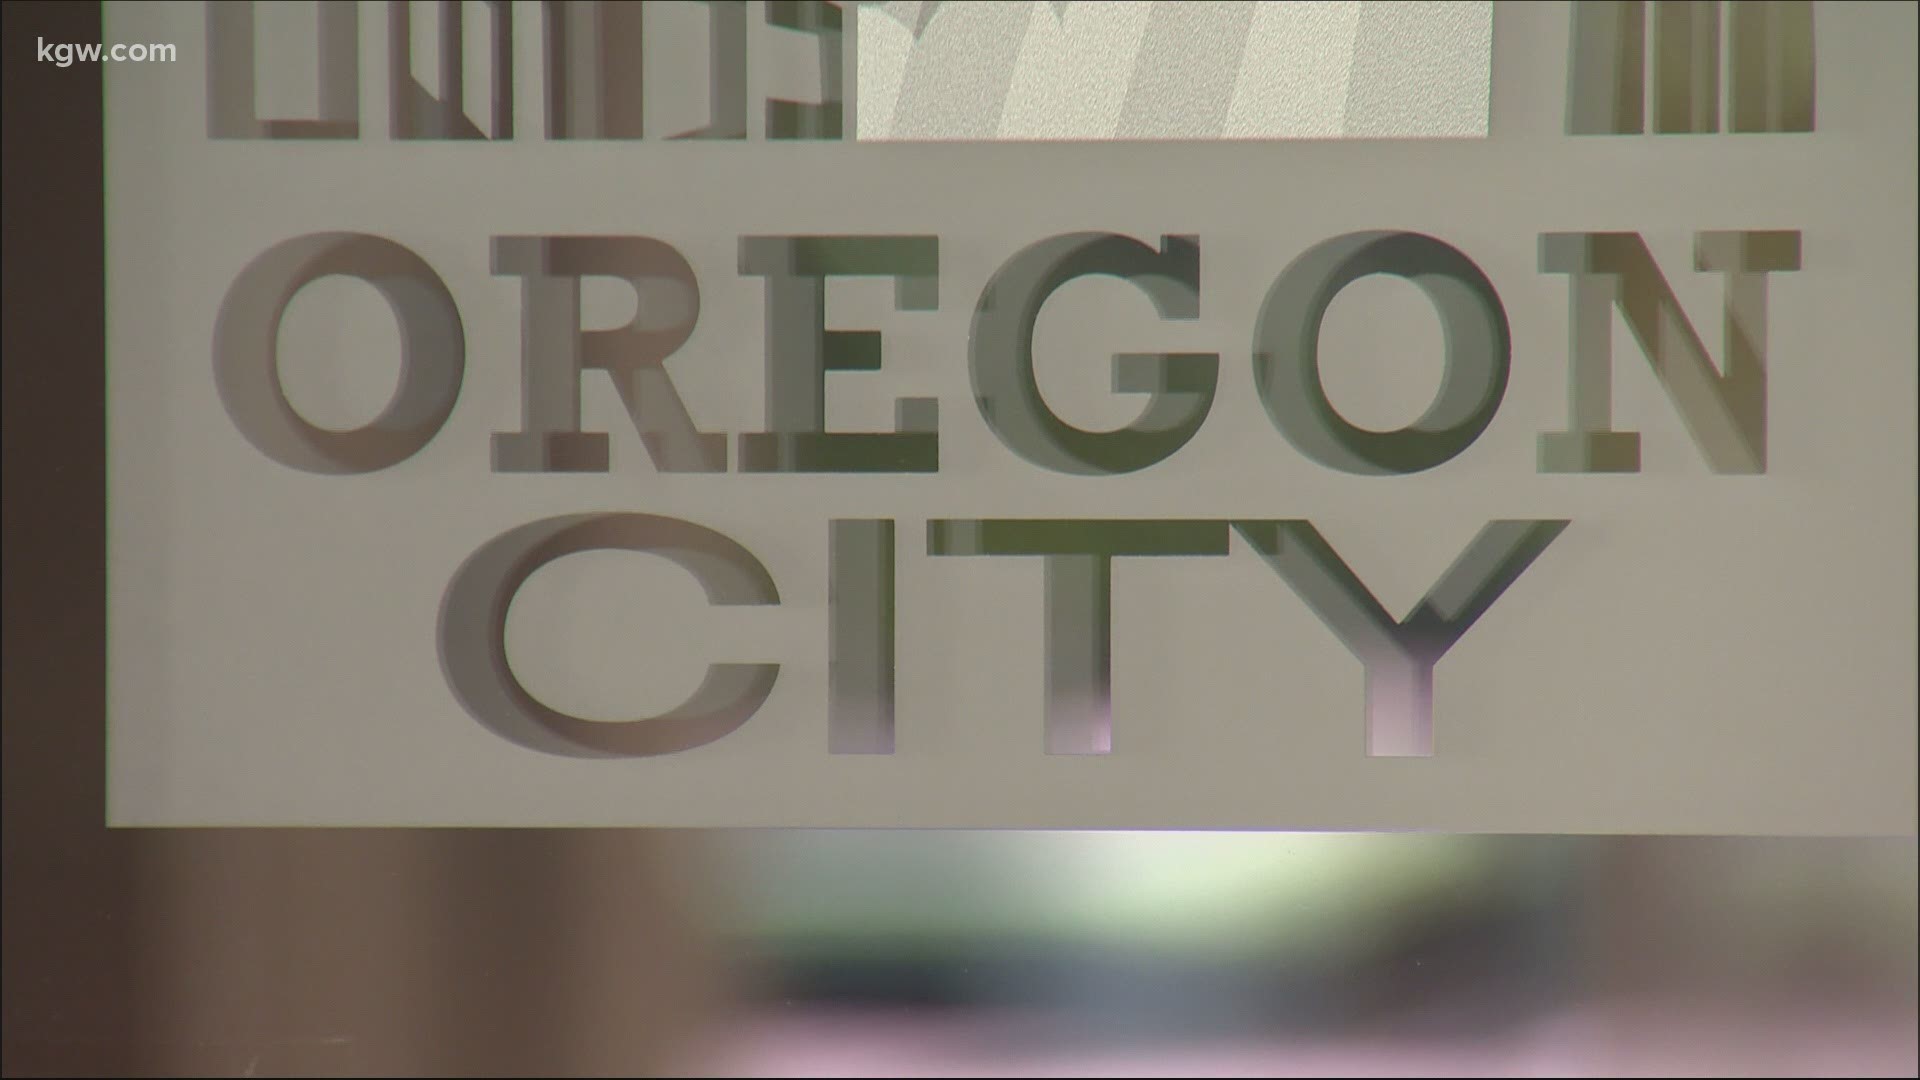 Voters in Oregon City are receiving two ballots this year because of a recall effort.